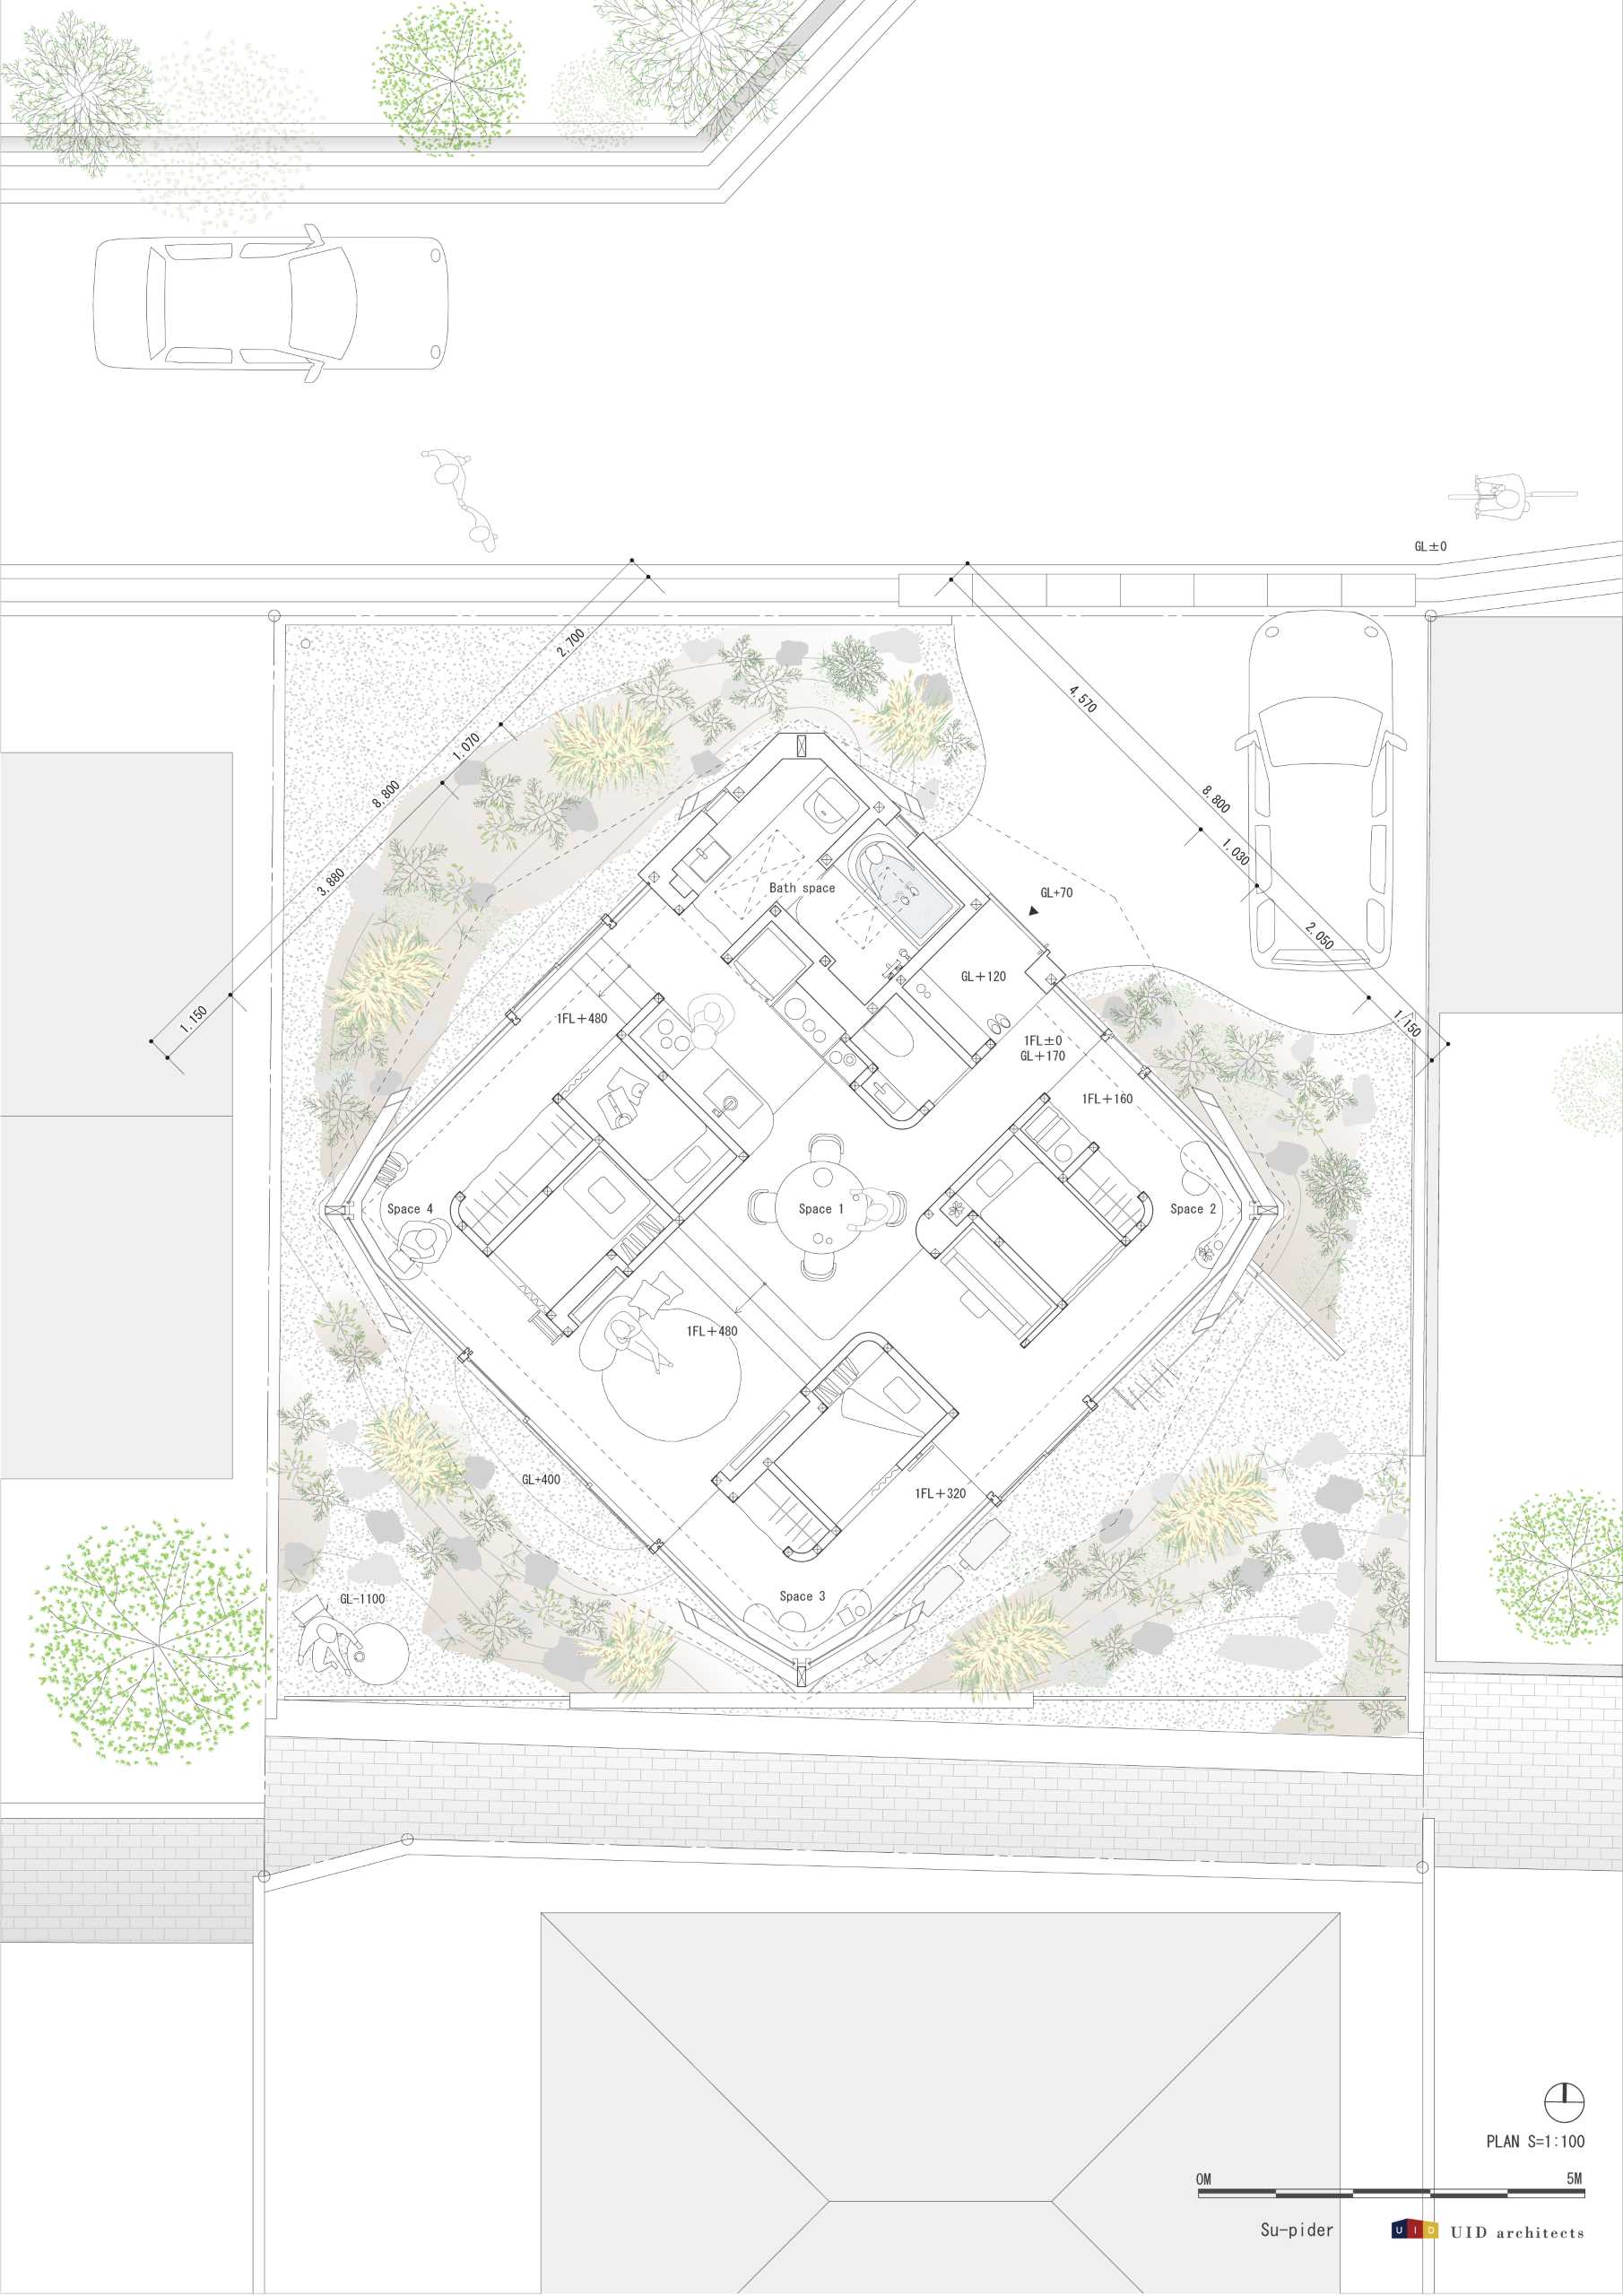 The floor plan of a modern house with an octagonal design that was inspired by a spiderweb.